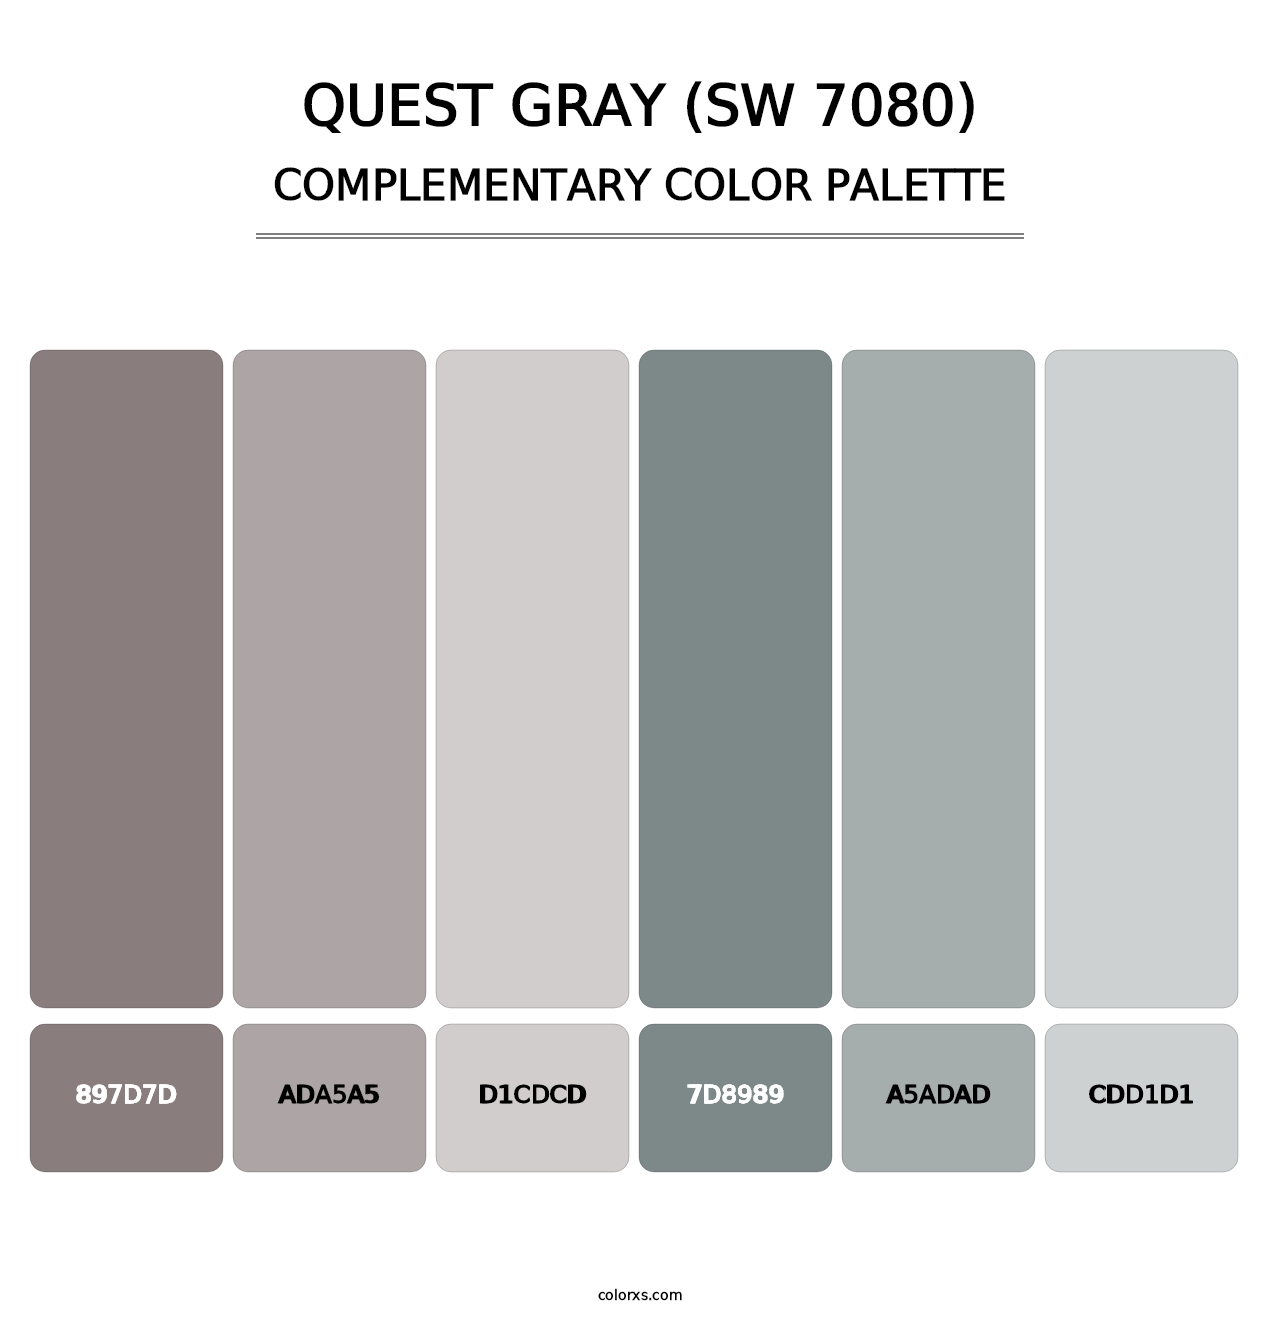 Quest Gray (SW 7080) - Complementary Color Palette